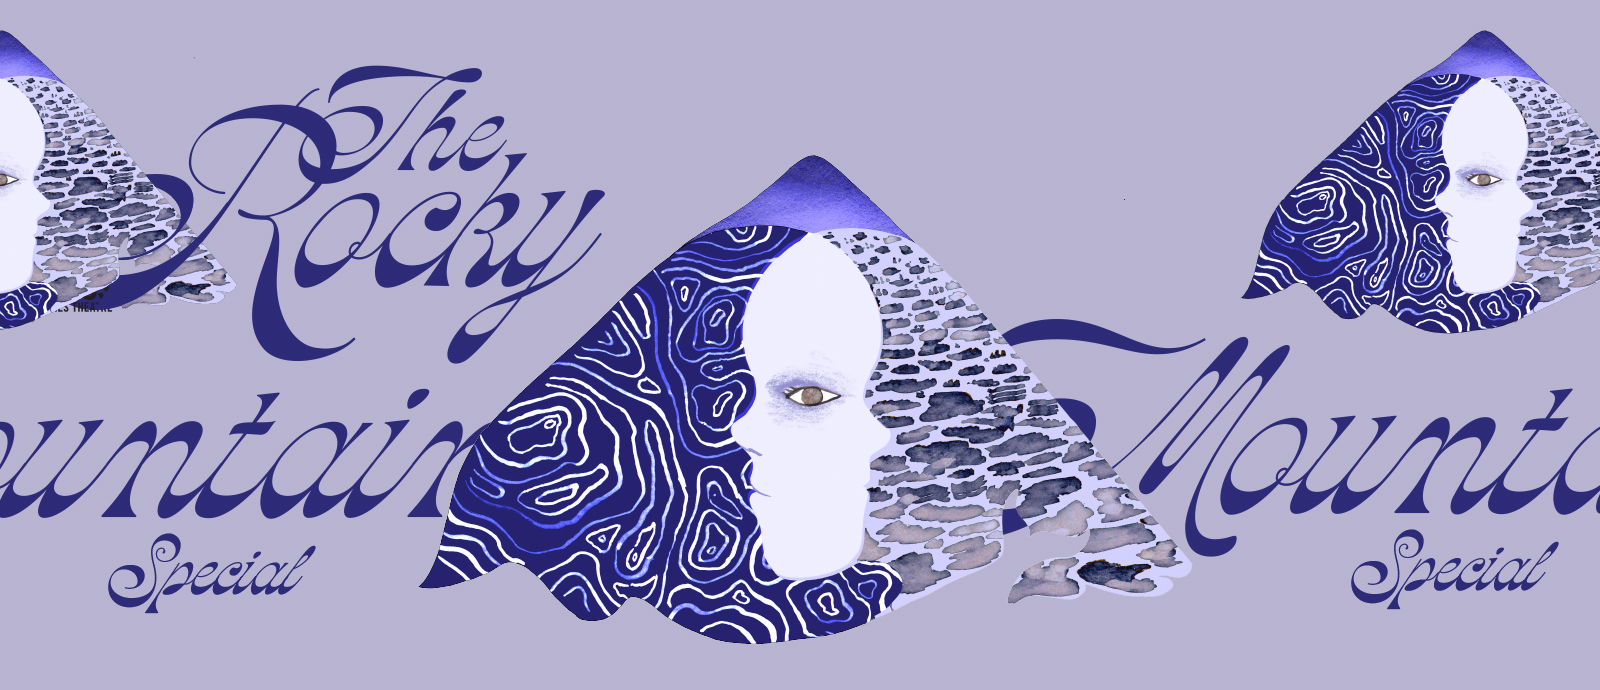 An illustration of a mountain shape with a face in the centre show in profile on either side with one eye in the middle. There is a pattern resembling water on the left side and a pattern resembling rocks on the right side. This illustration is repeated partially at the top of the time. Curly text reads ‘The Rocky Mountain Special’ with Mountain and Special cut in half and restarting on the opposite side of the image. The entire illustration is in shades of blue.